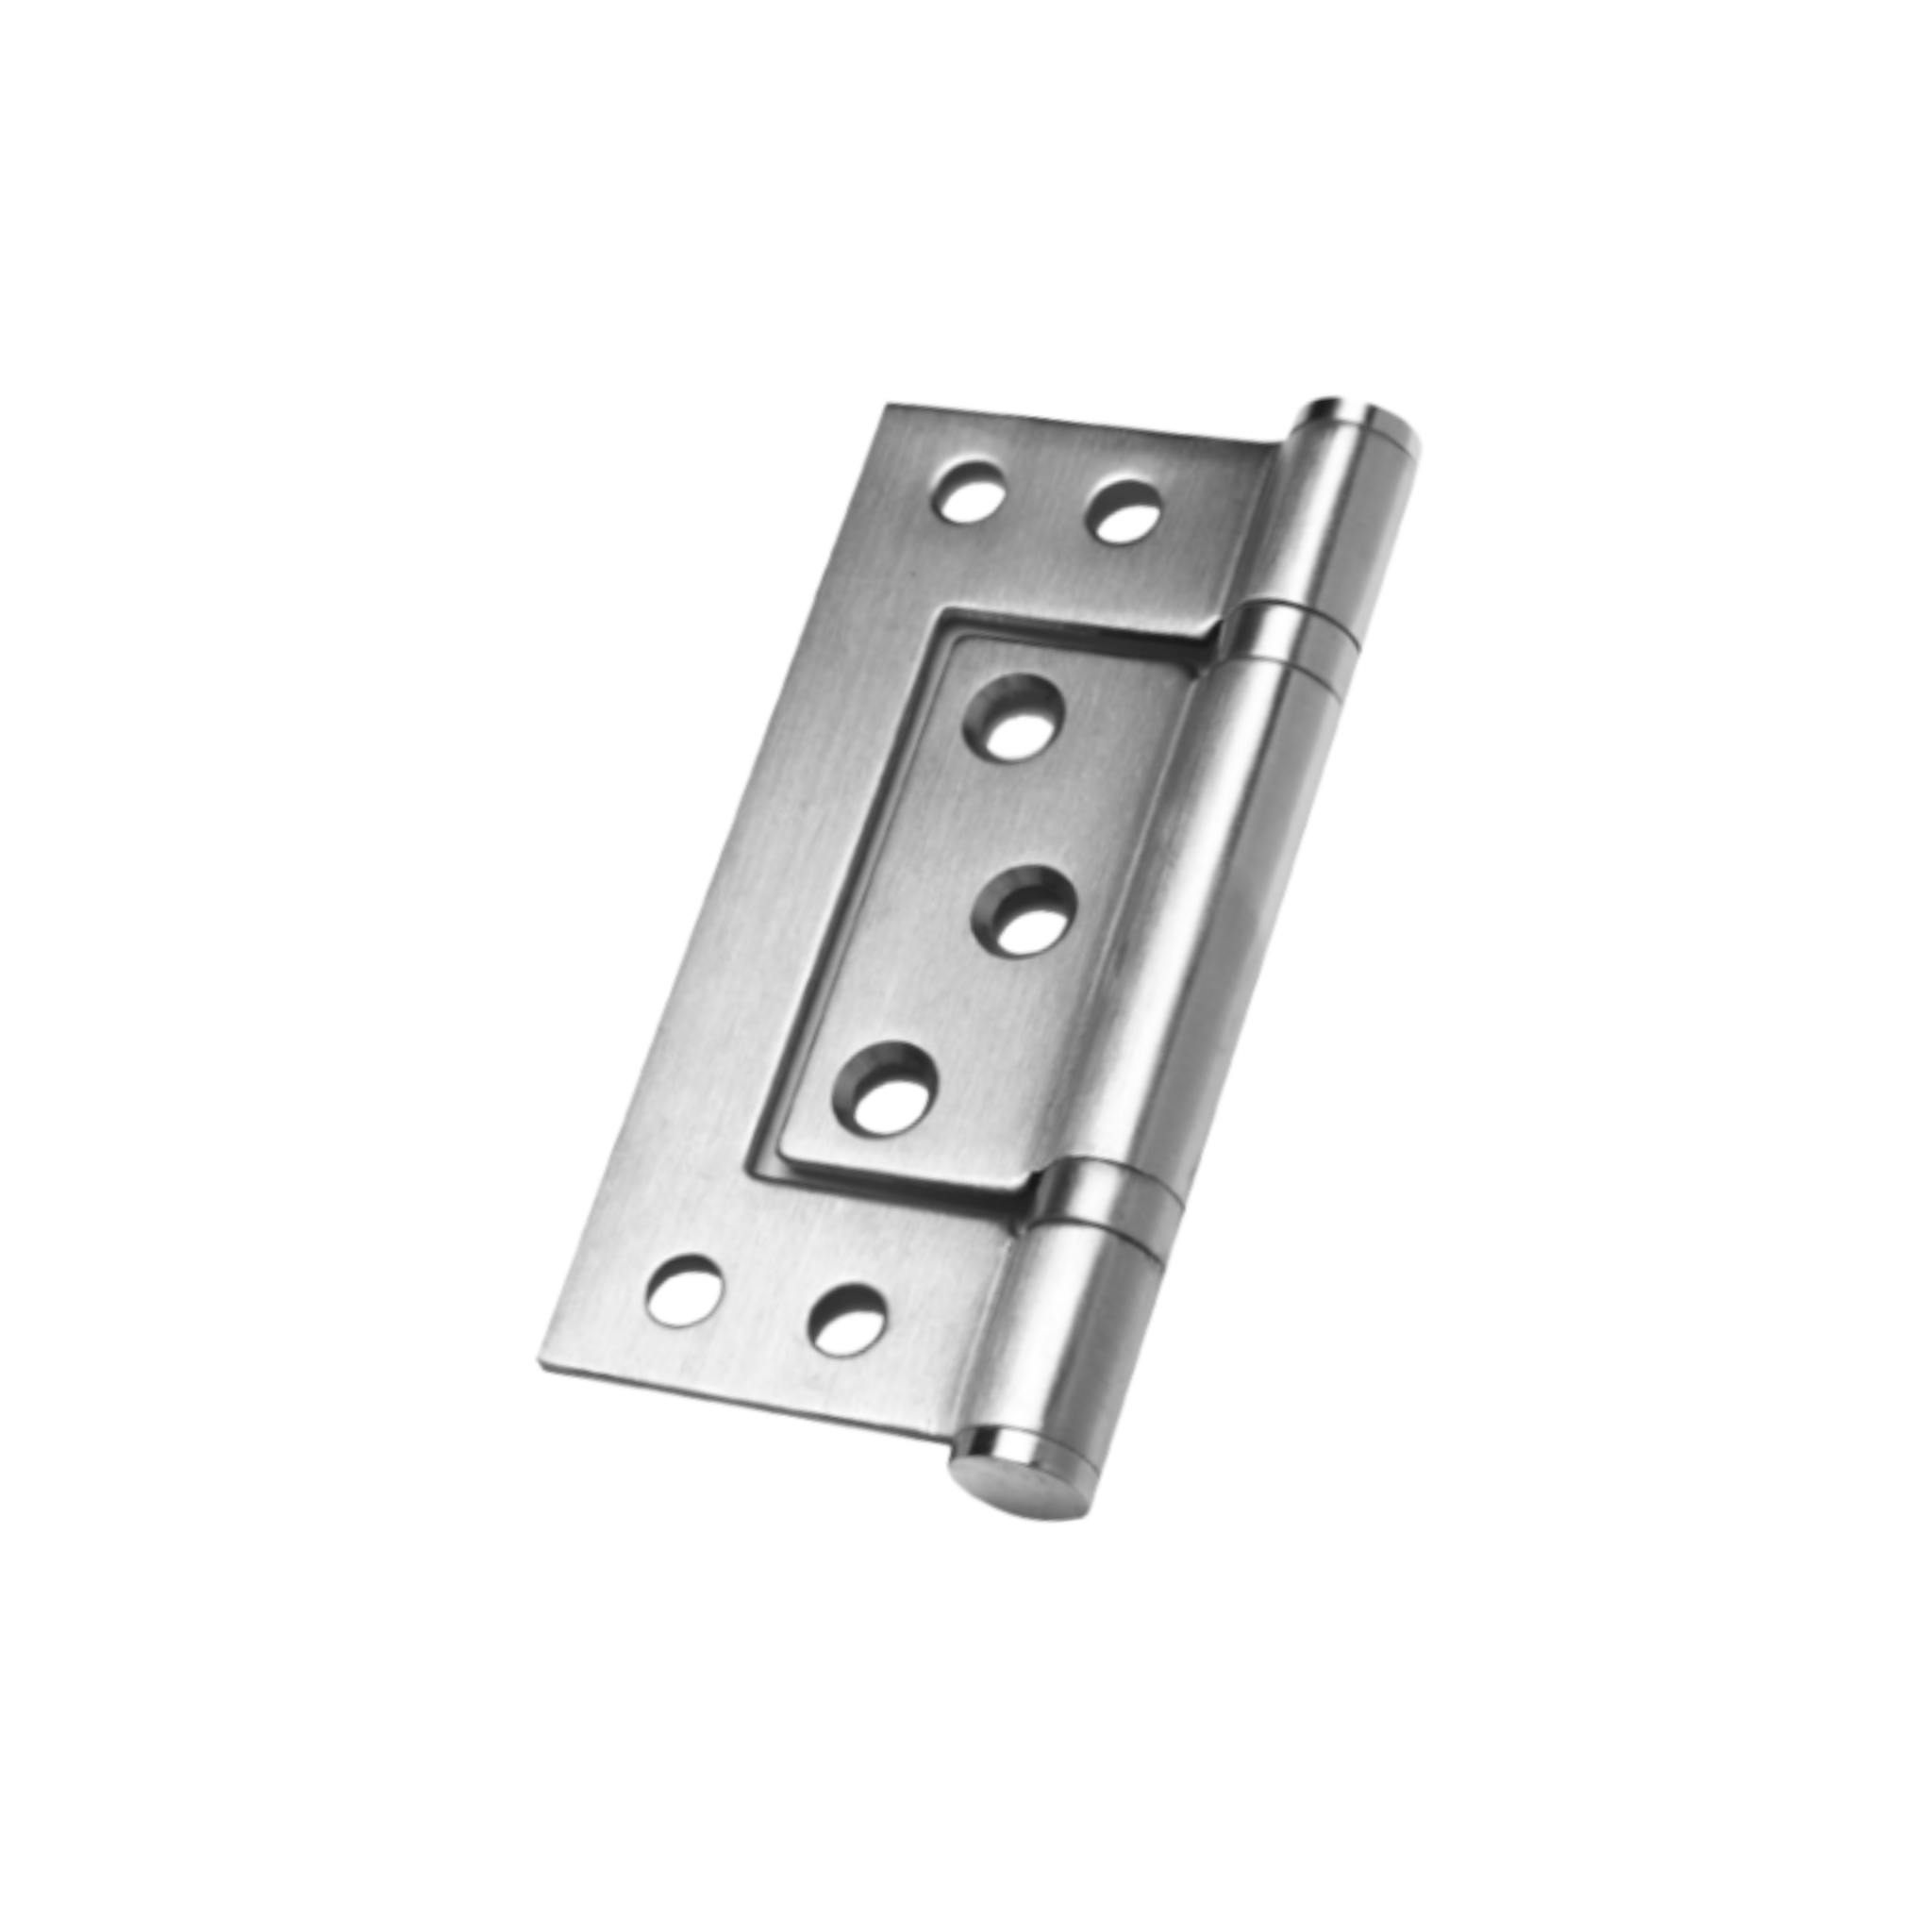 QS4441, Sinkless Hinge, Left Hand, 2 x Hinges (1 Pair), 100mm (h) x 76mm (w) x 2mm (t), Stainless Steel, QS